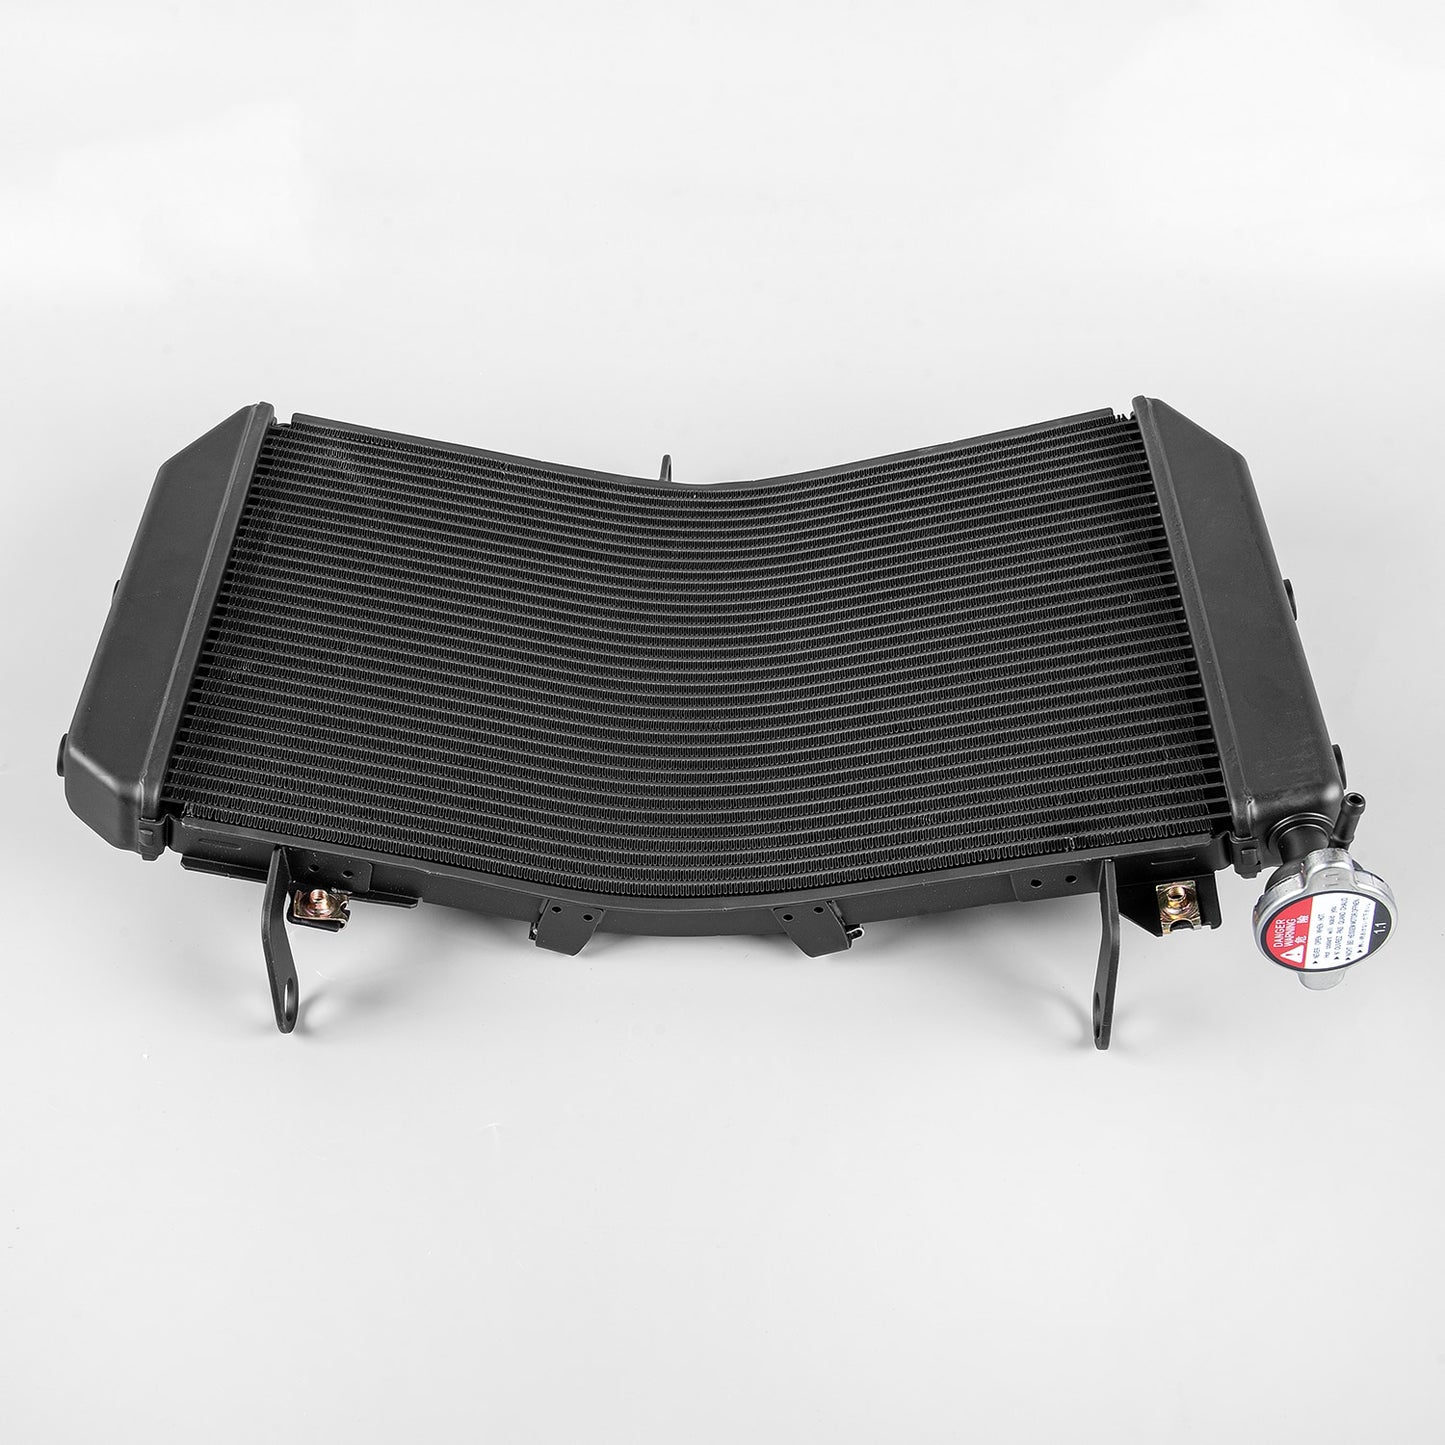 Motorcycle Engine Radiator Cooling Part For Yamaha YZF-R1 YZF-R1M YZF R1 R1M 2015-2023 Cooler Water Tank Grille Guard Accessories 2016 2017 2018 2019 2020 2021 2022